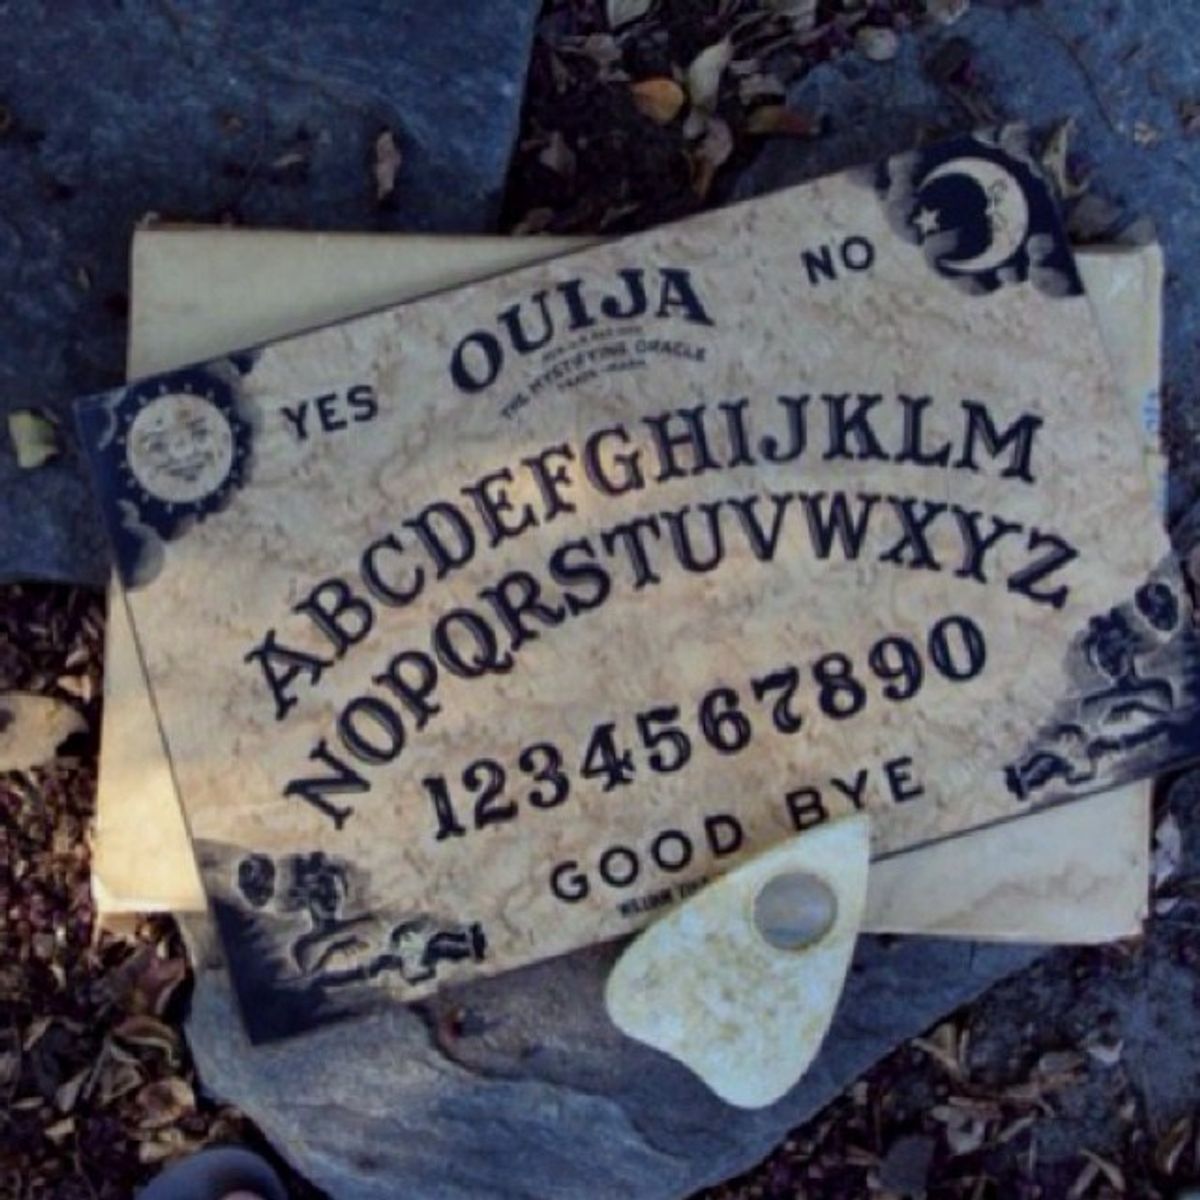 The History of Ouija Boards